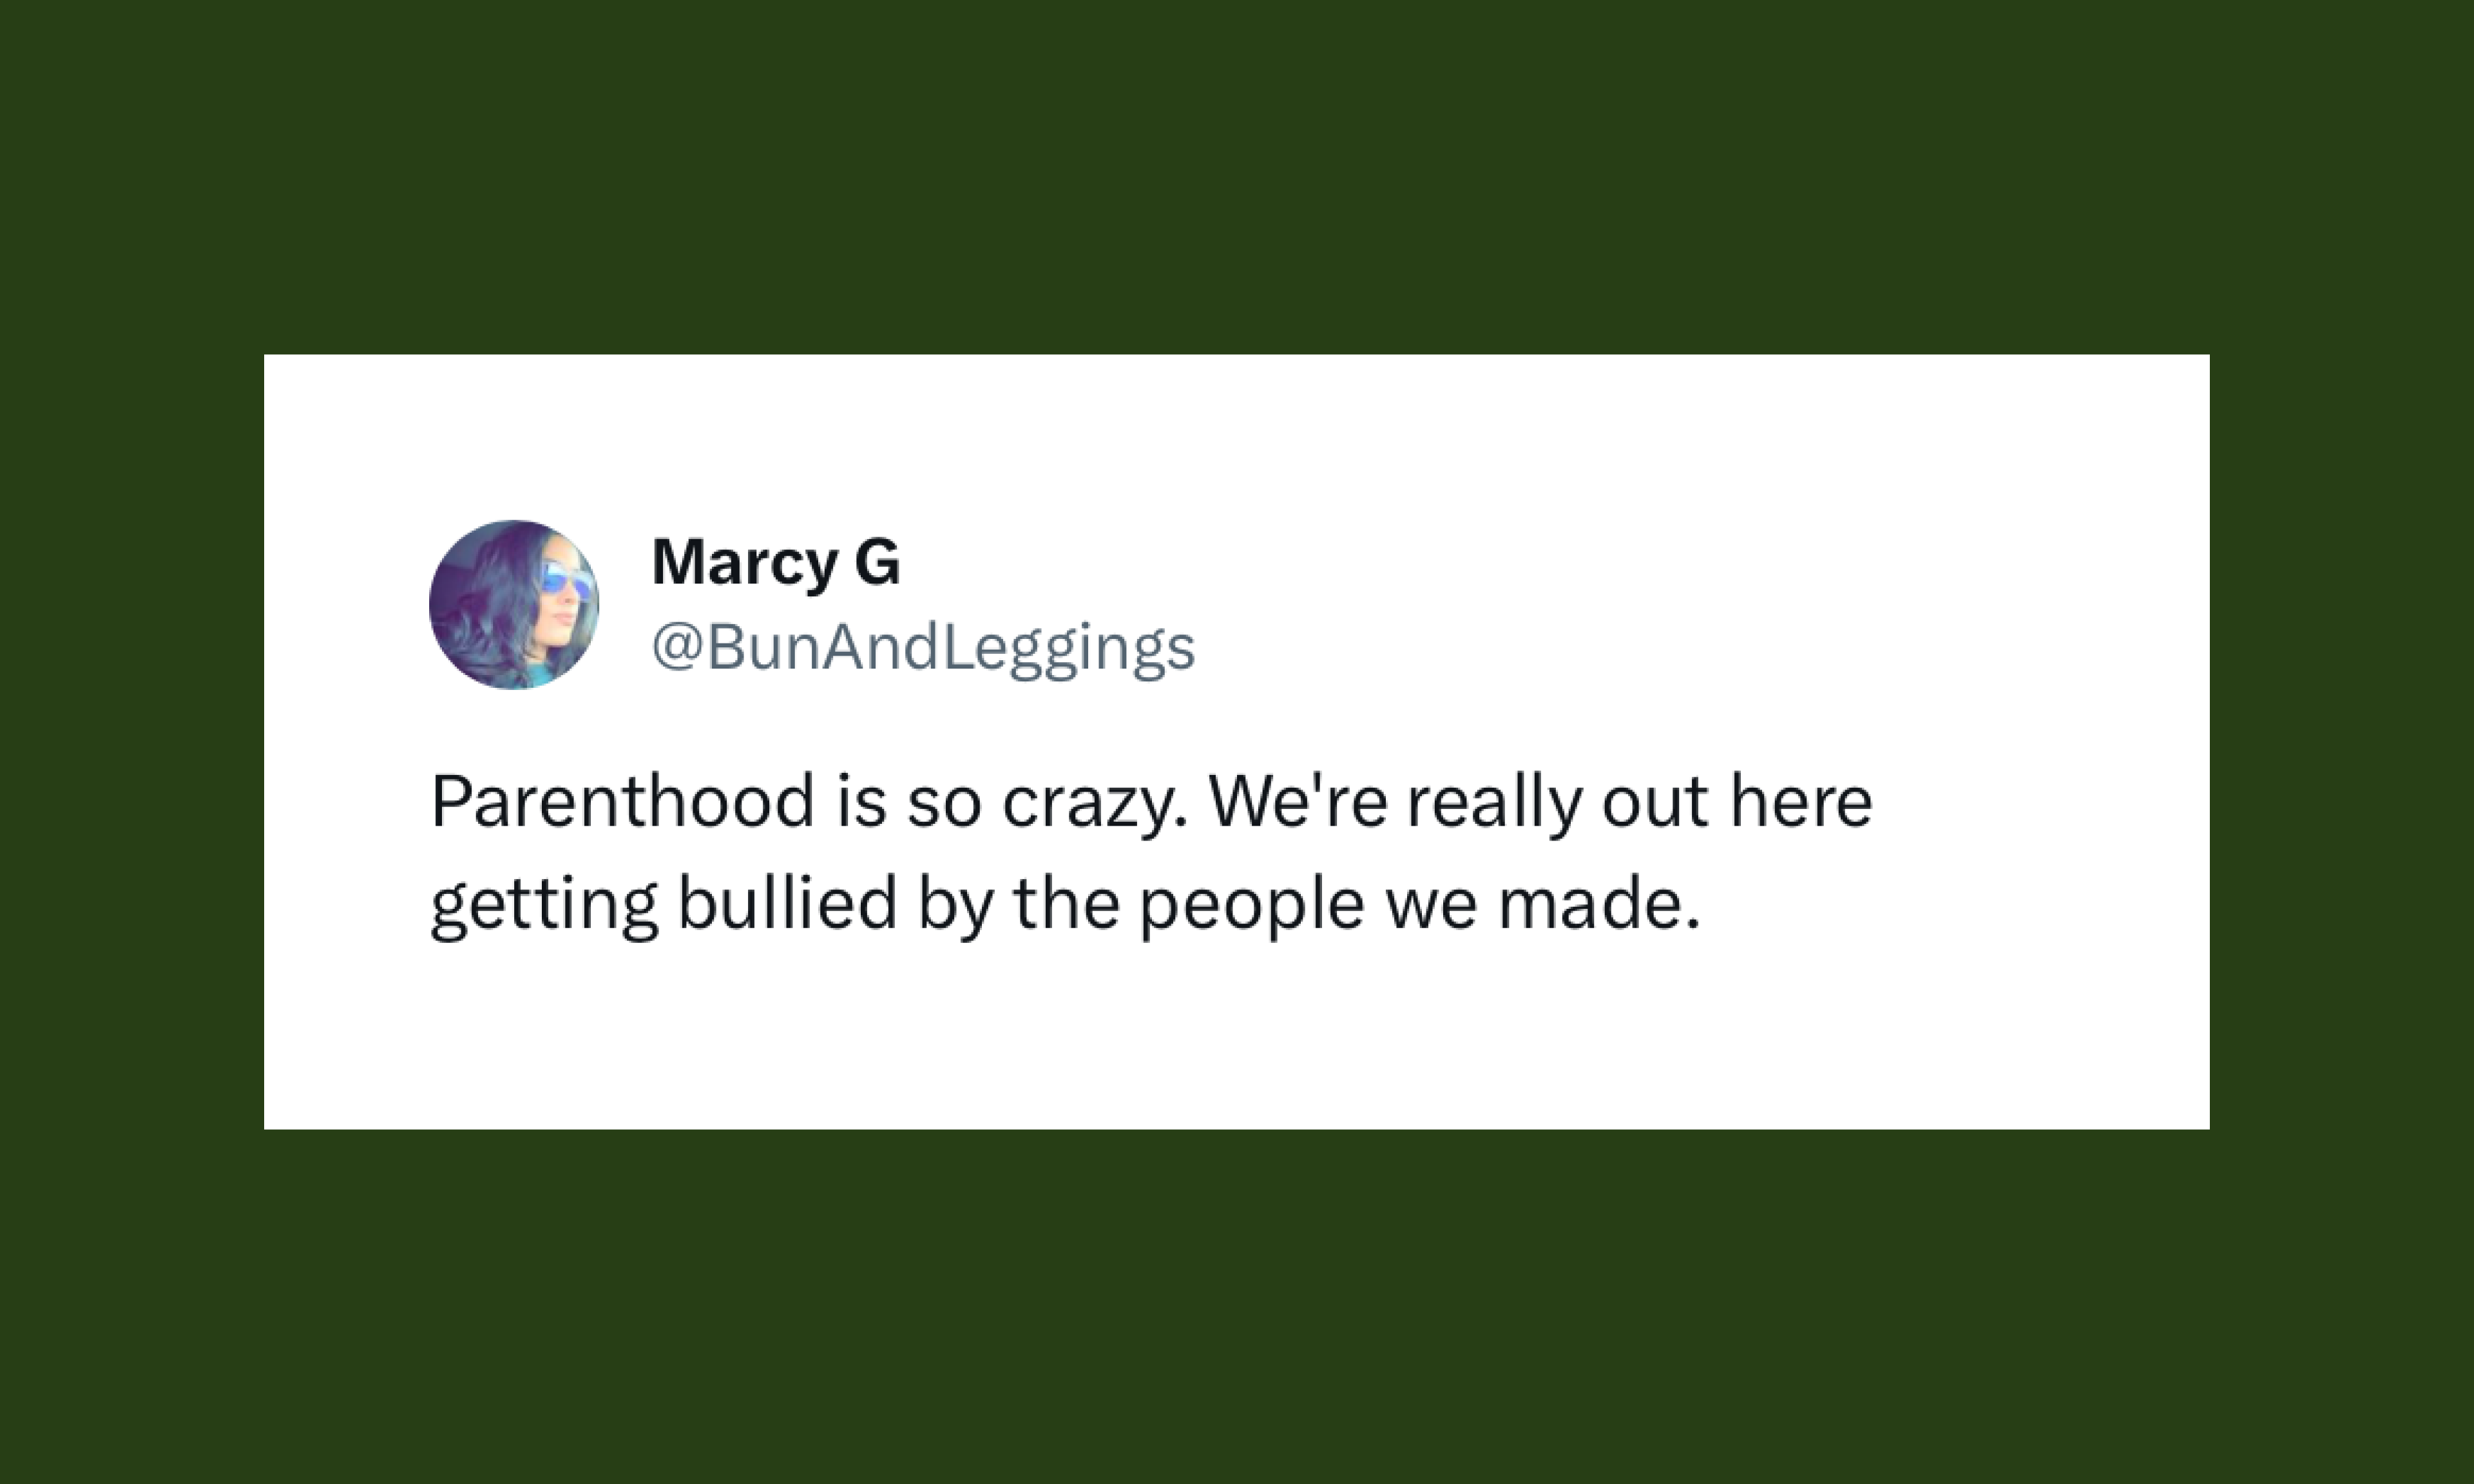 Image from a tweet on X about parenting